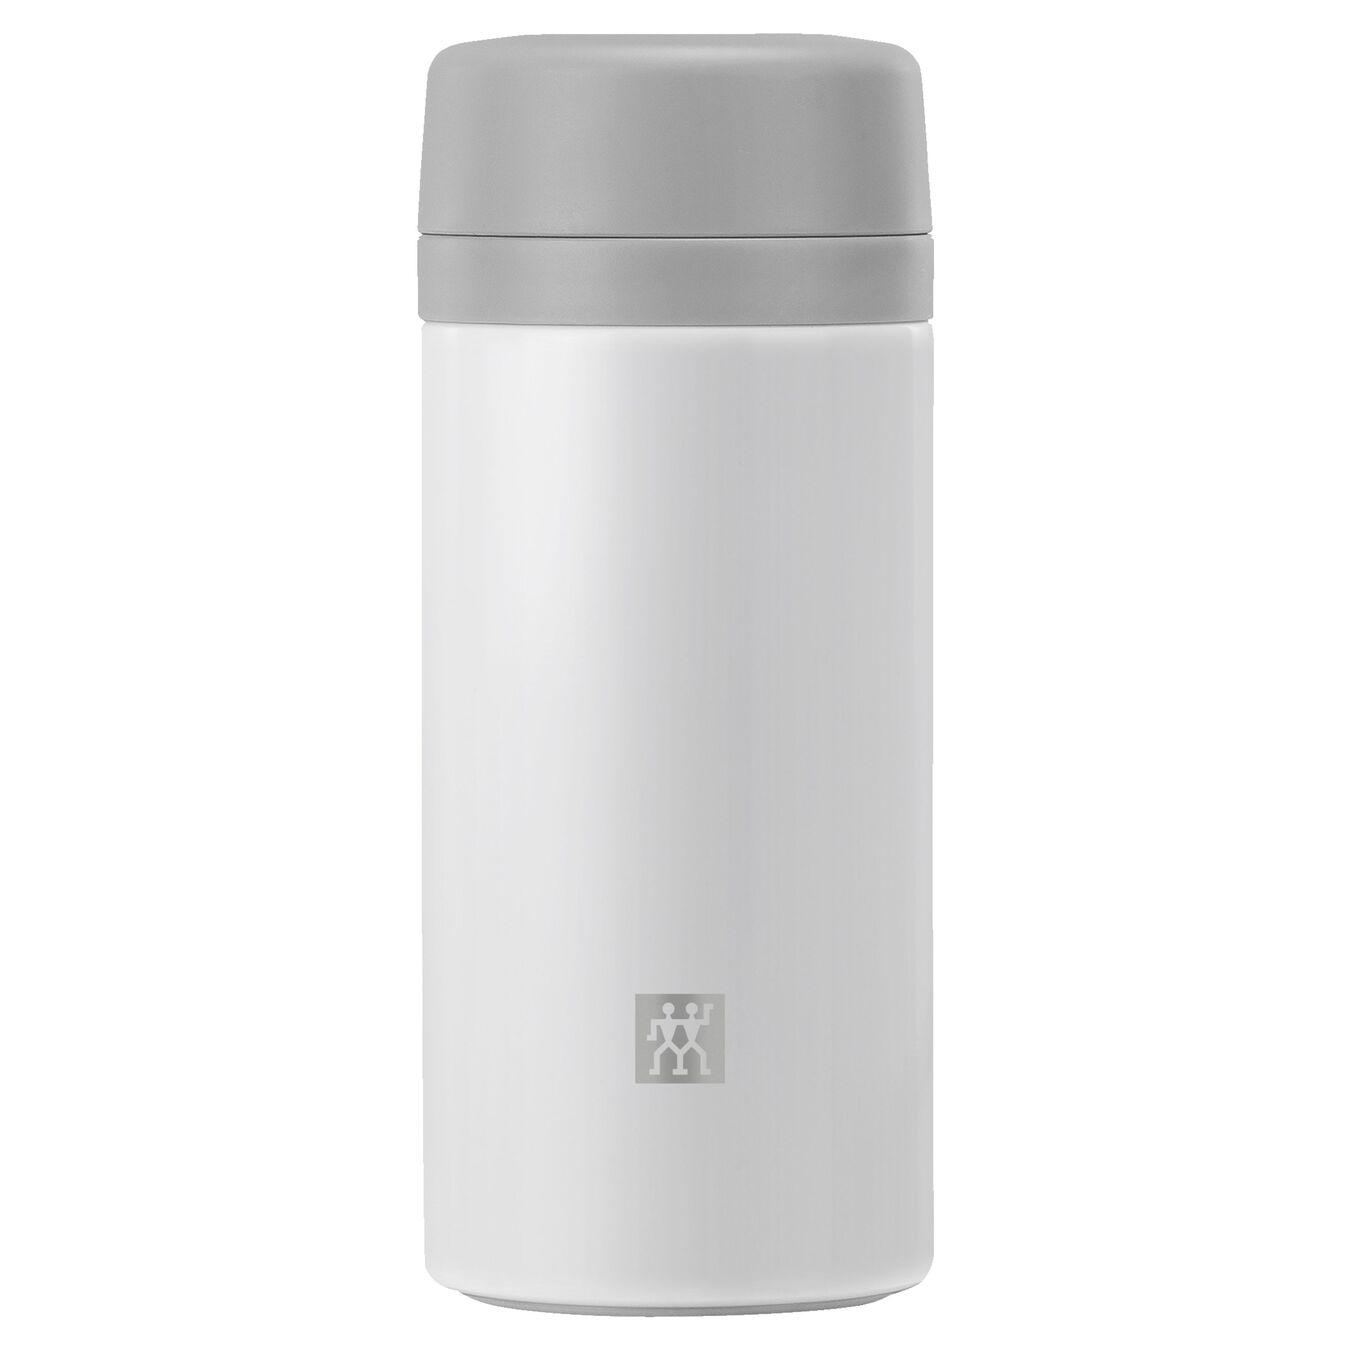 420 ml Thermo flask white-grey,,large 1